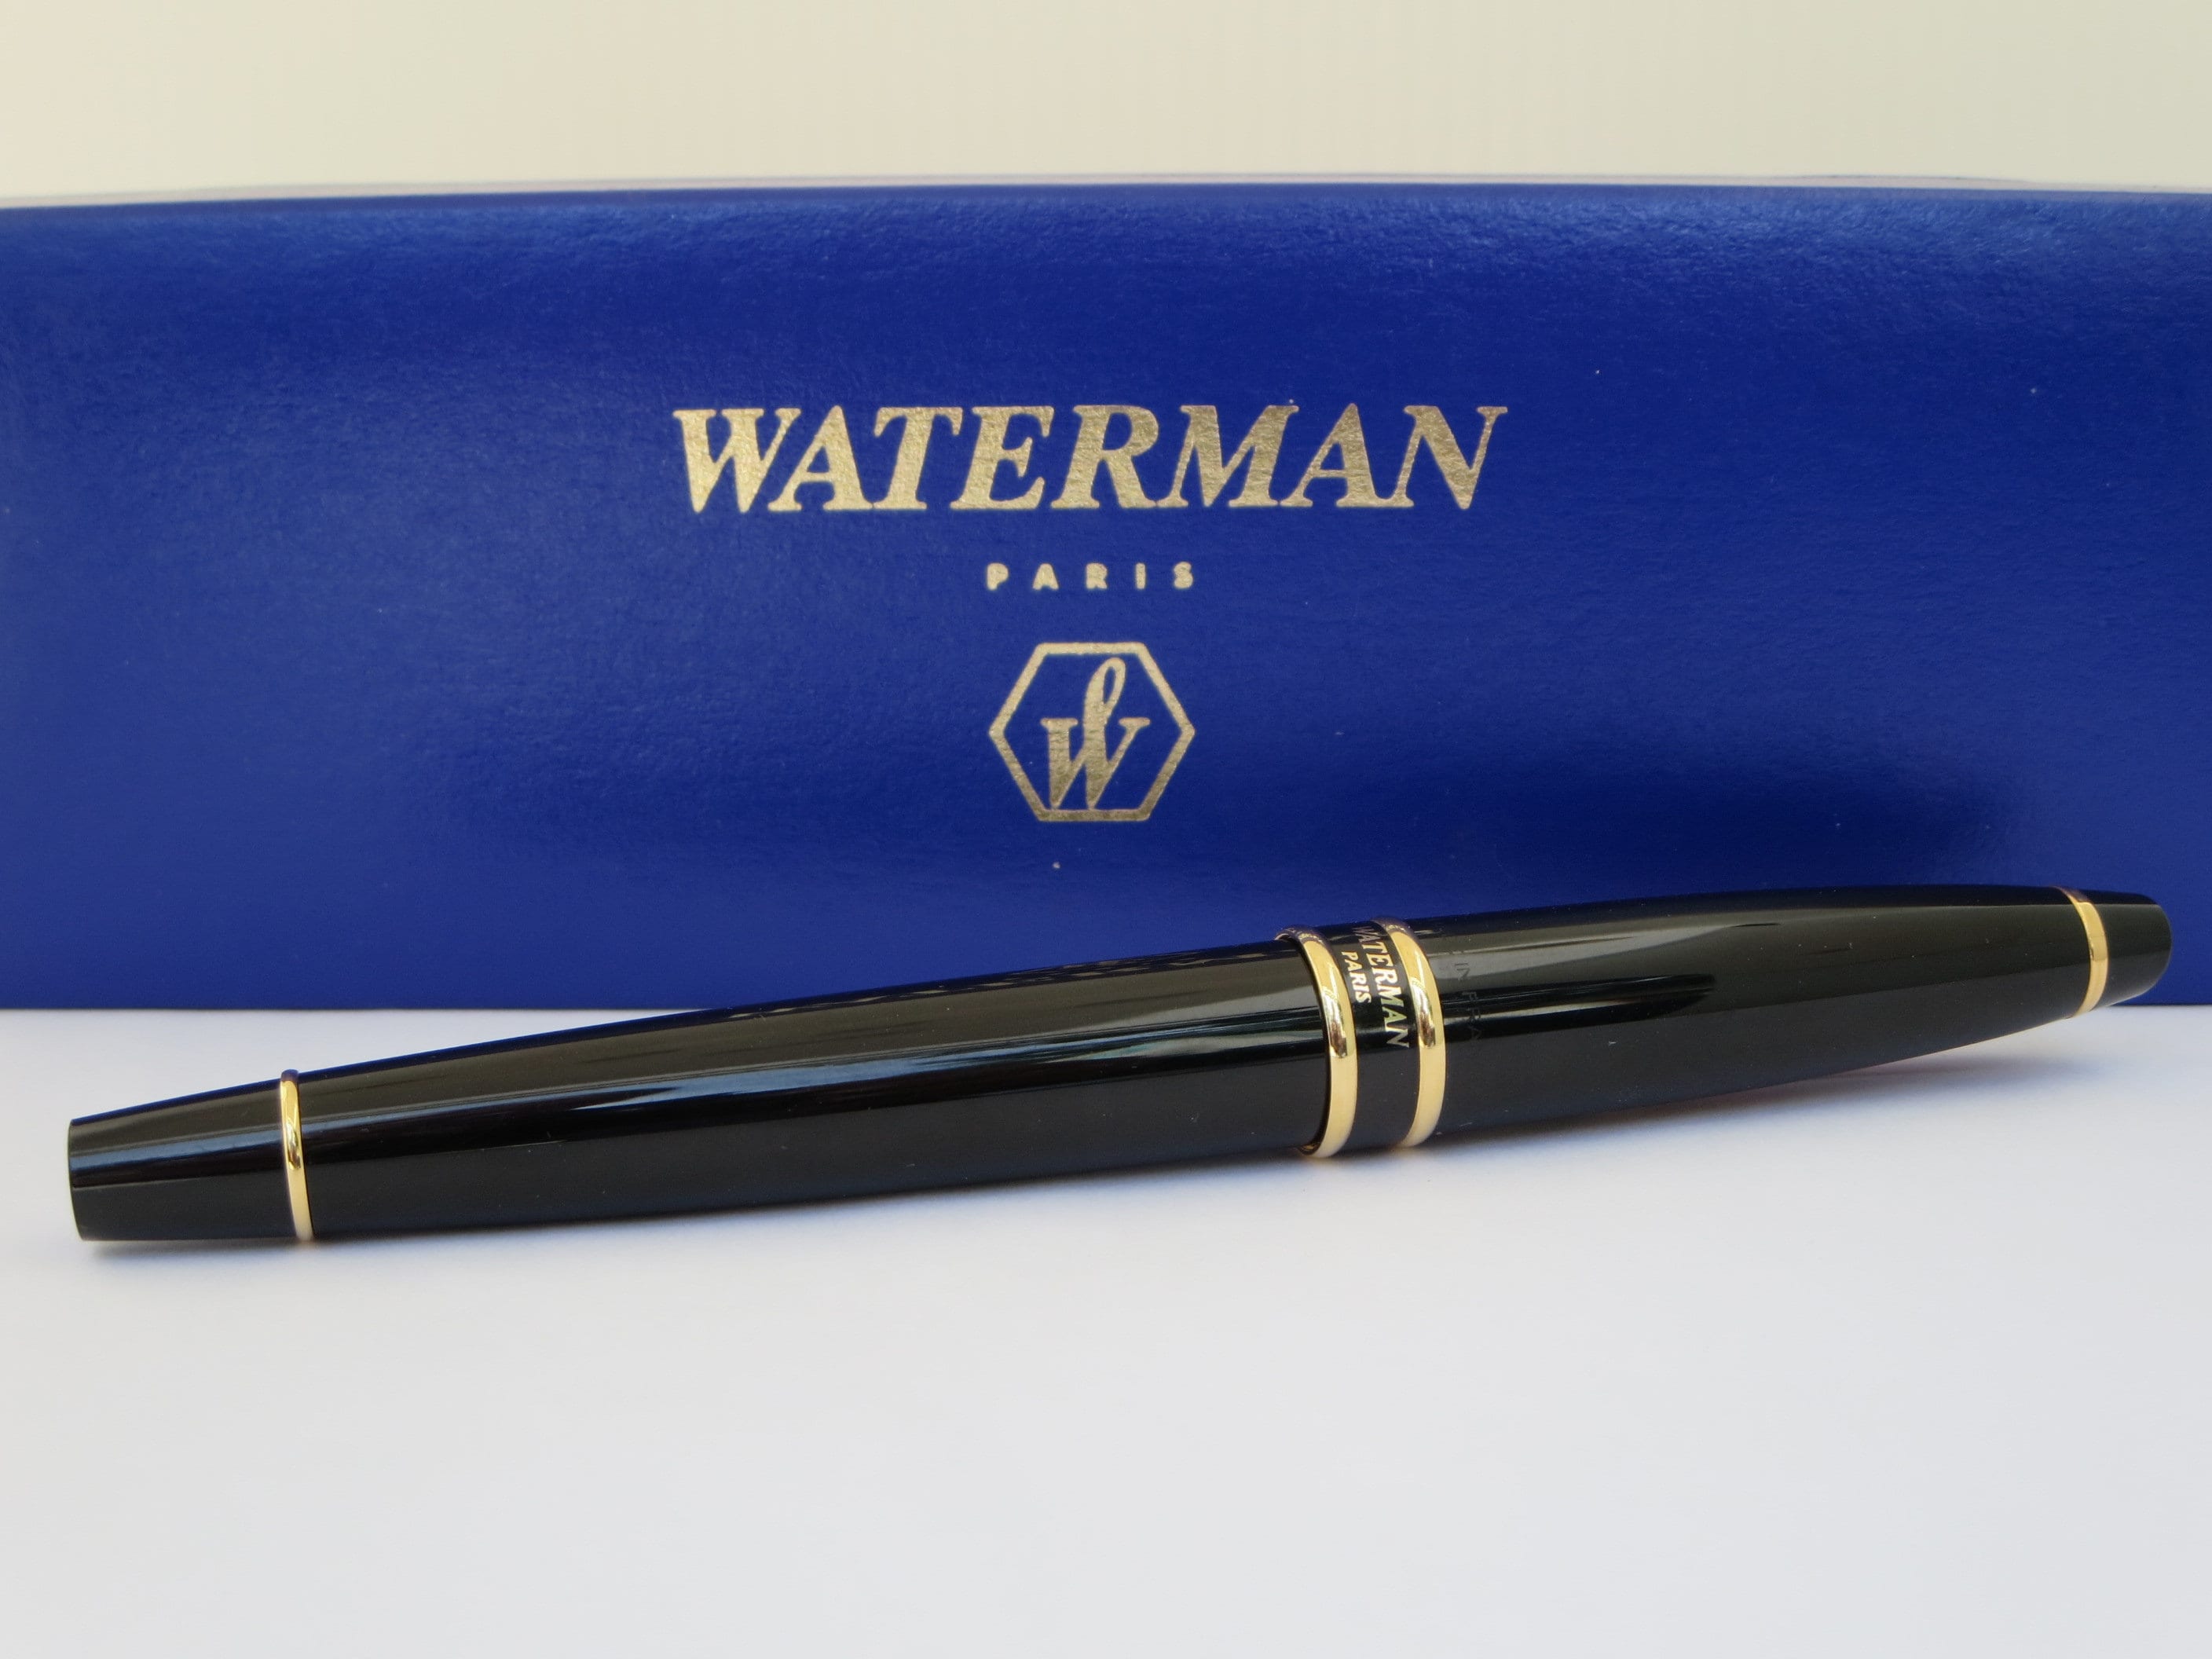 VINTAGE FOUNTAIN PEN Waterman Paris Ink Pen Black and Gold Writing Drawing  Collector Office Accessories Writing Christmas Gift 